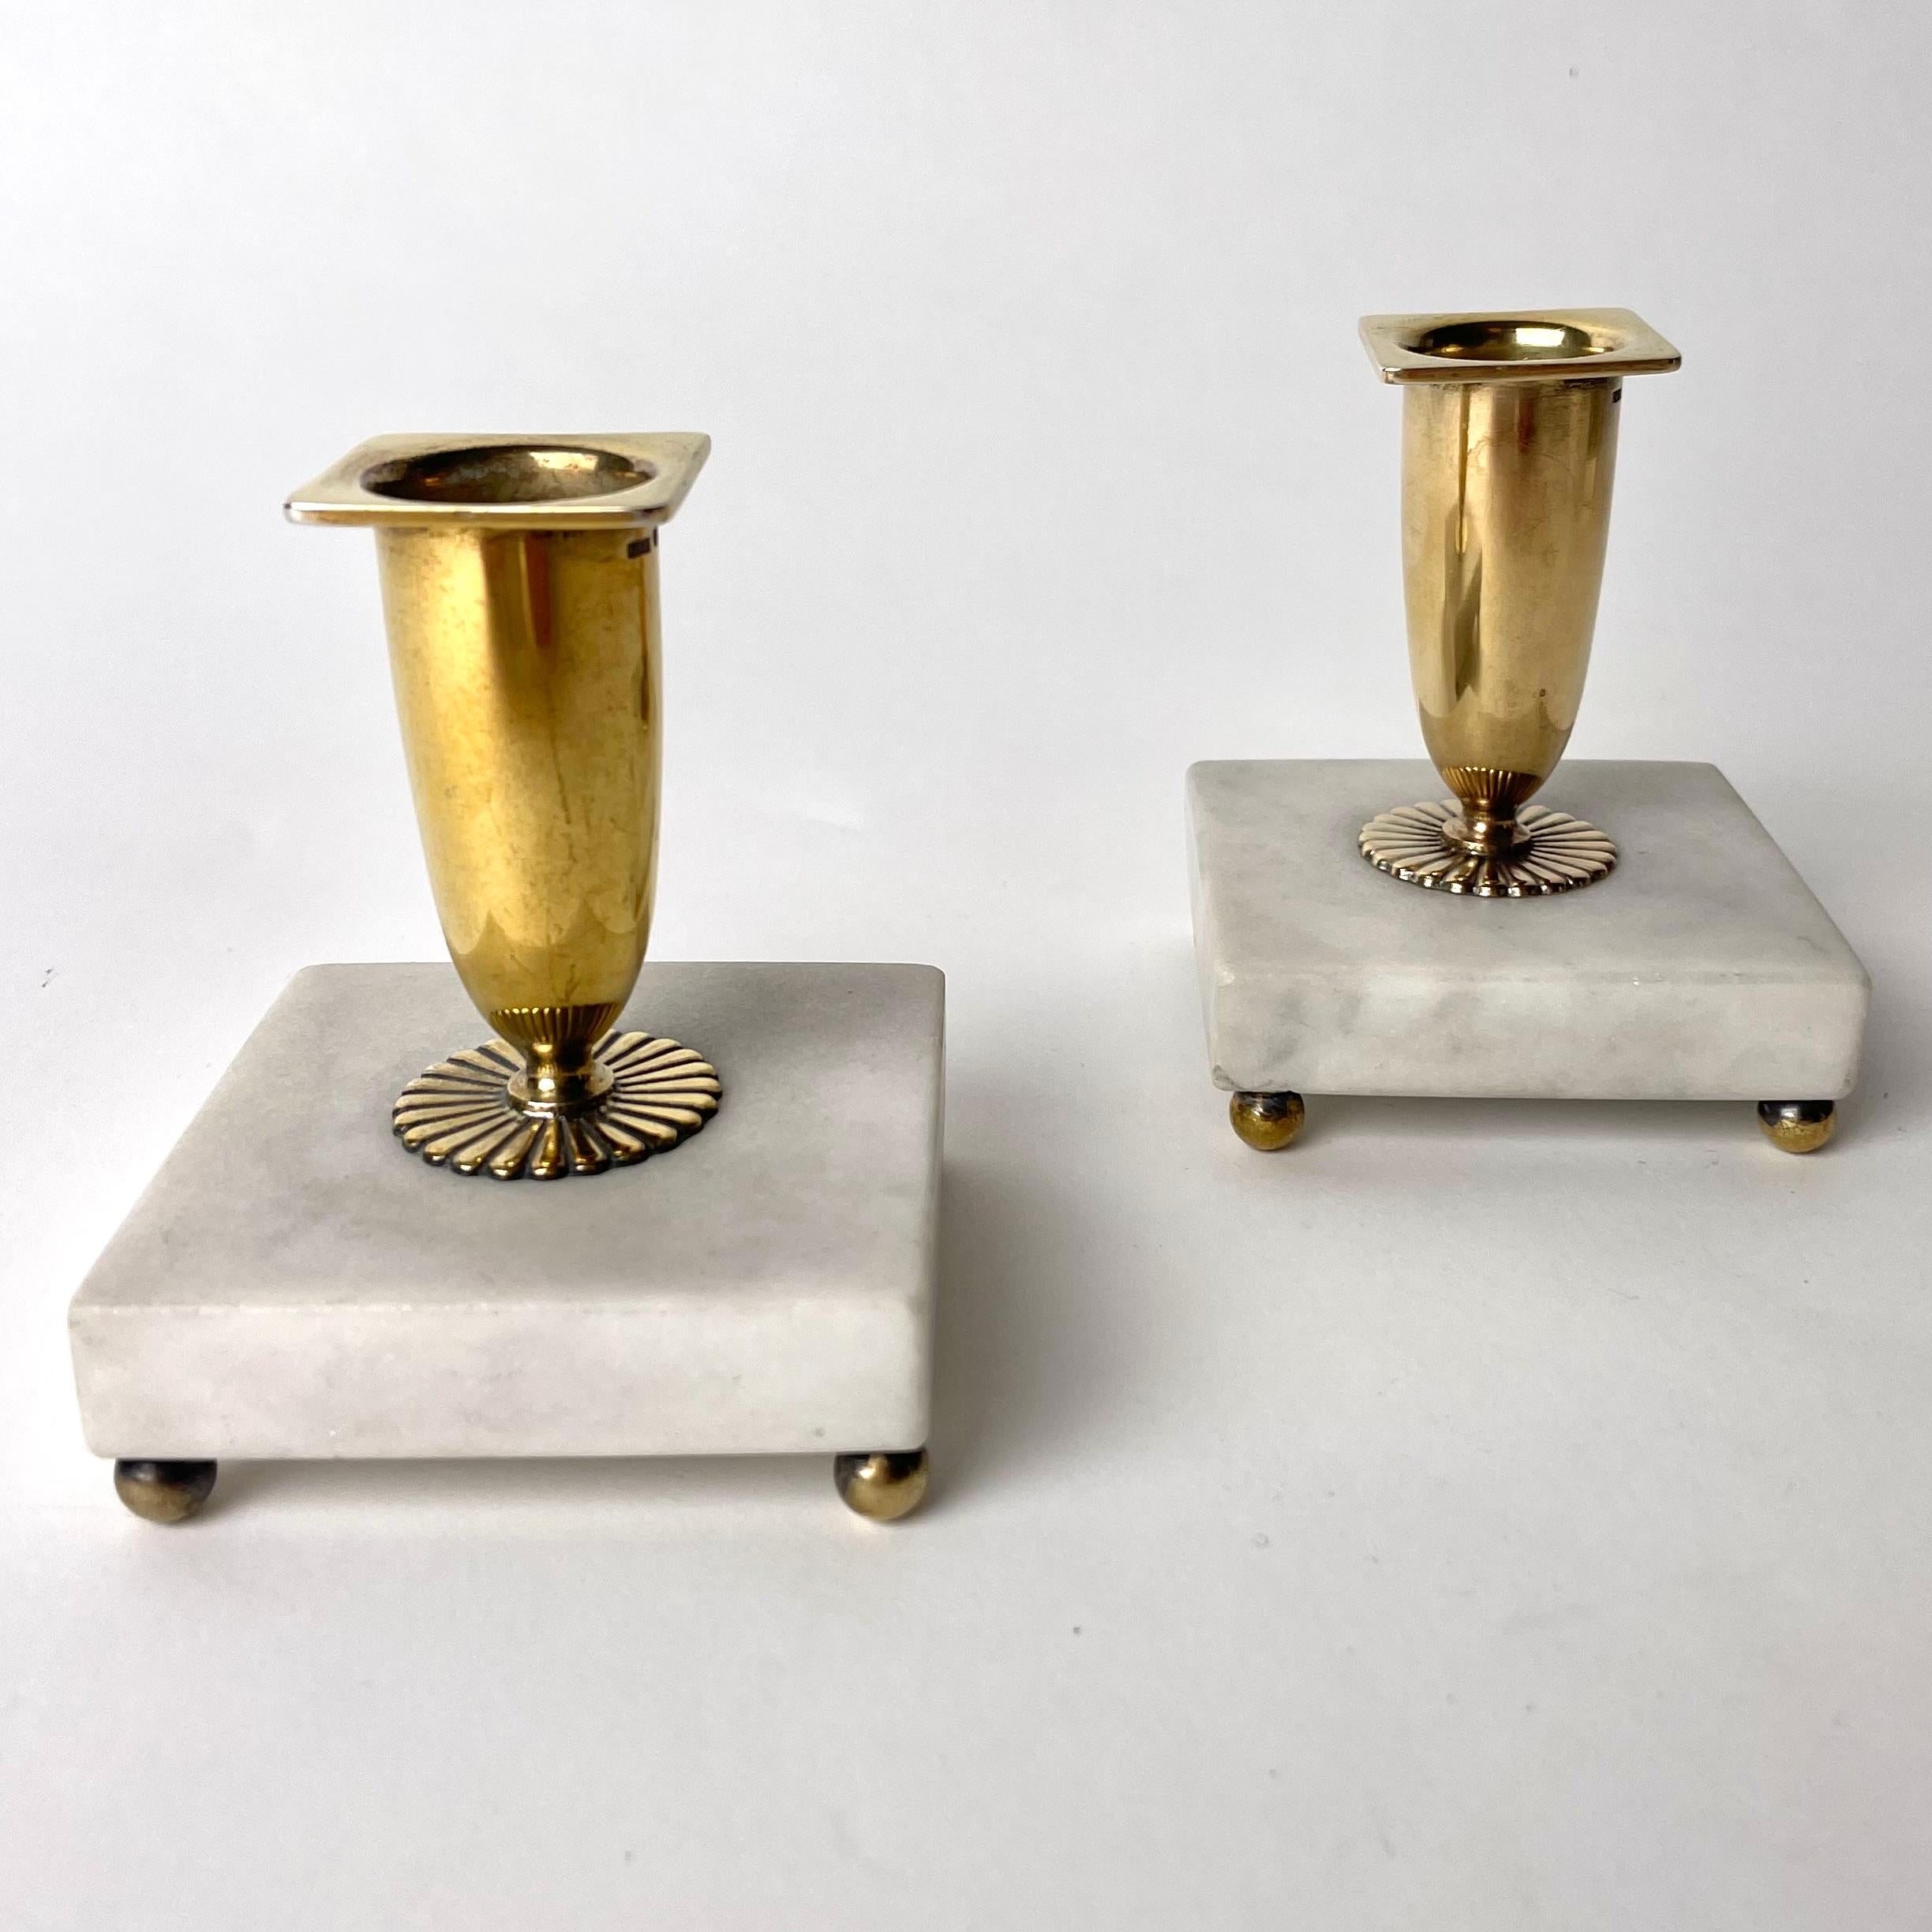 Three-piece Desk Set in gilded silver. Swedish Grace from CG Hallbergs from 1929 For Sale 4